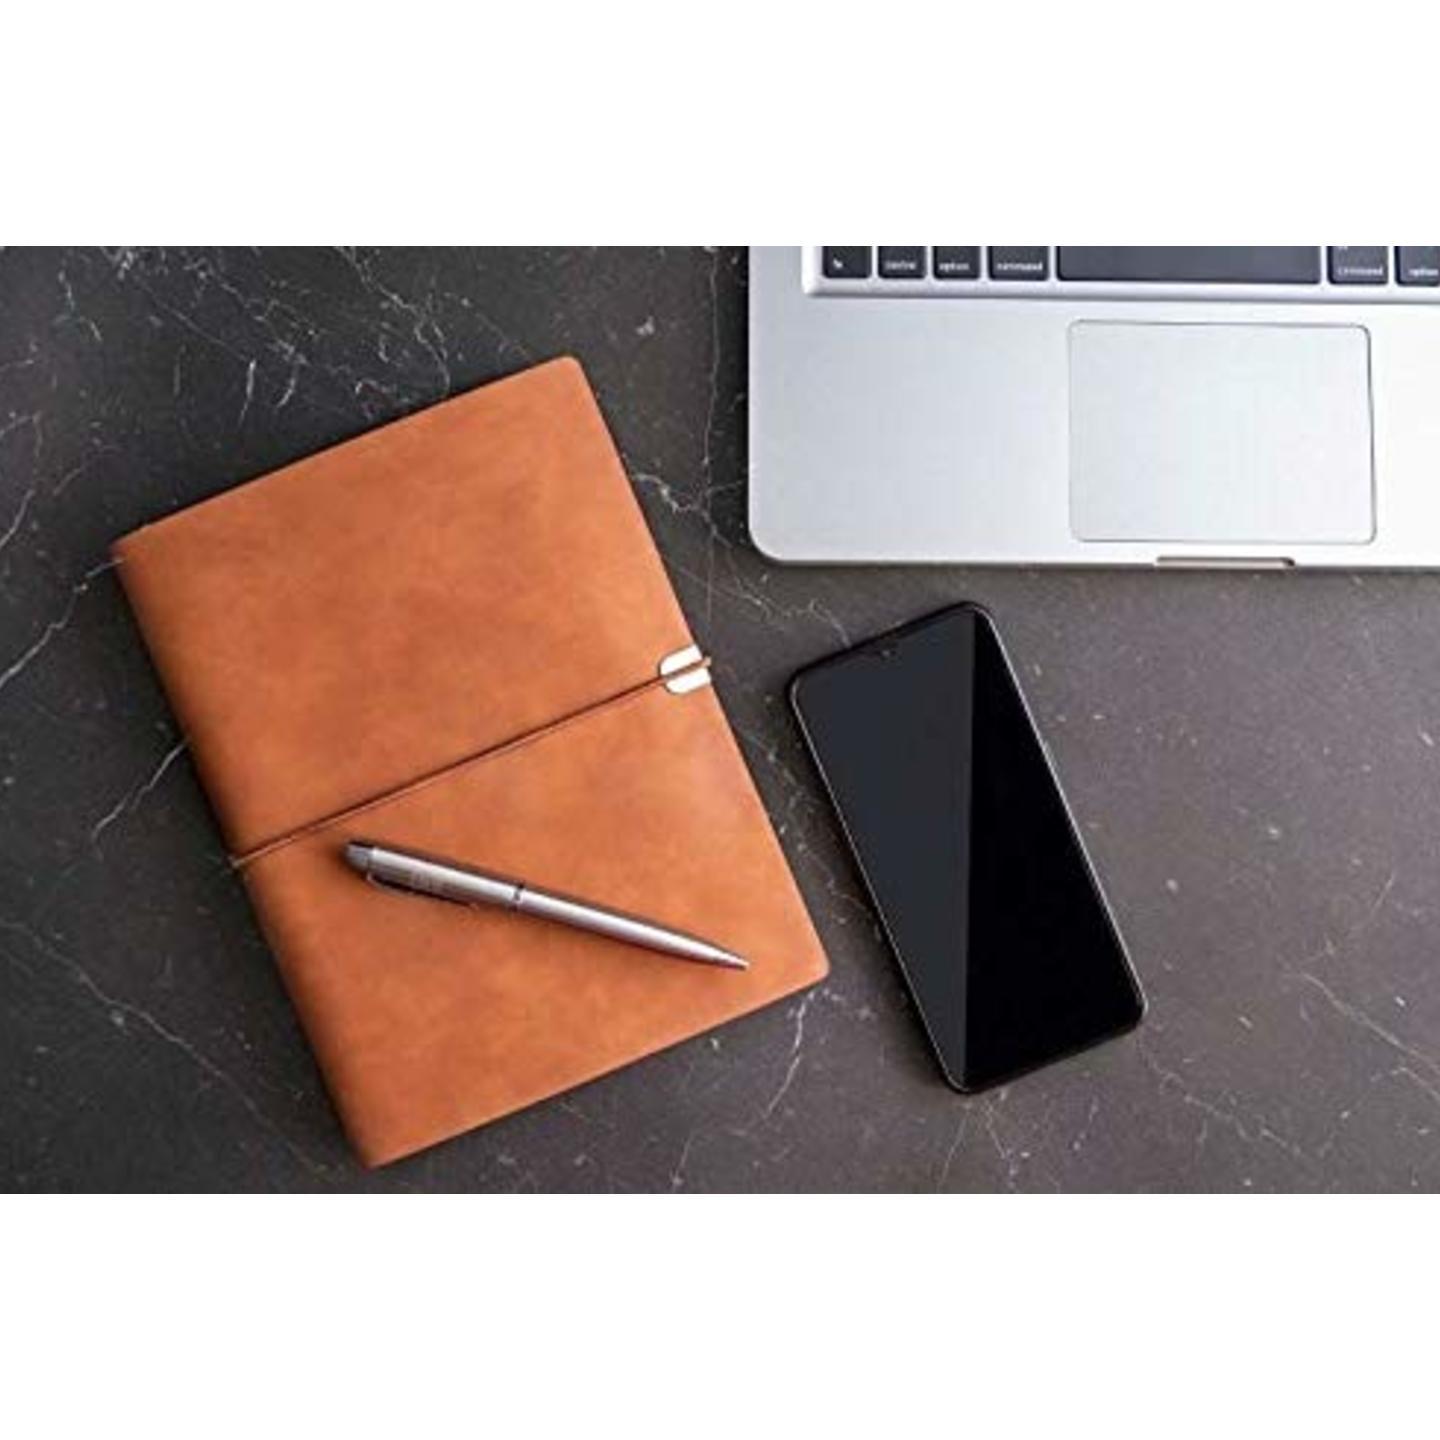 Leather Finish Refillable Sheets 200 Pages Pen Holder 4 Colour Options Organizer Diary Planner Notebook Journal for Business Executives Tan